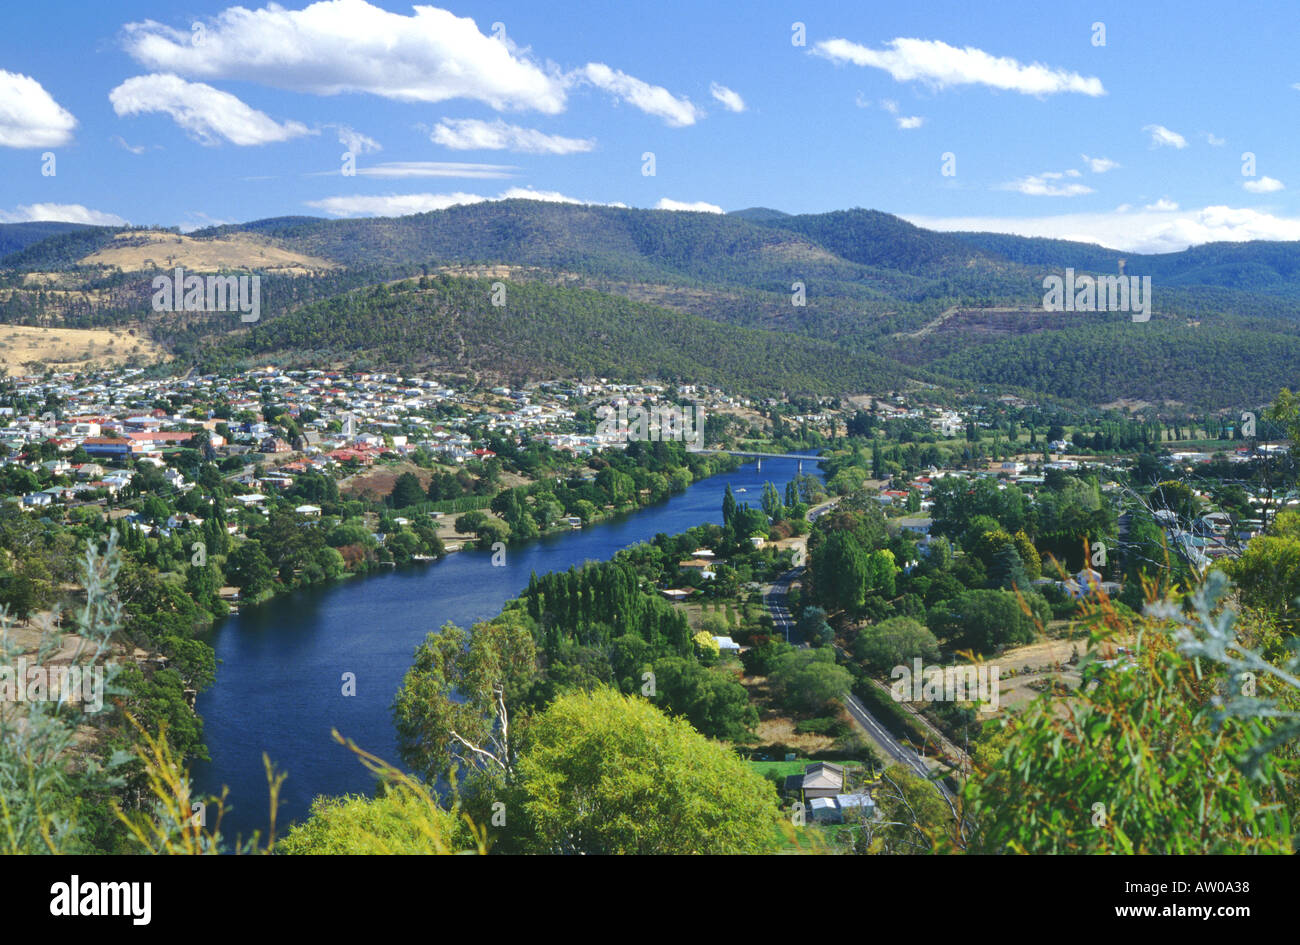 Tasmania looking up the Derwent Valley overlooking the town of New Norfolk Stock Photo